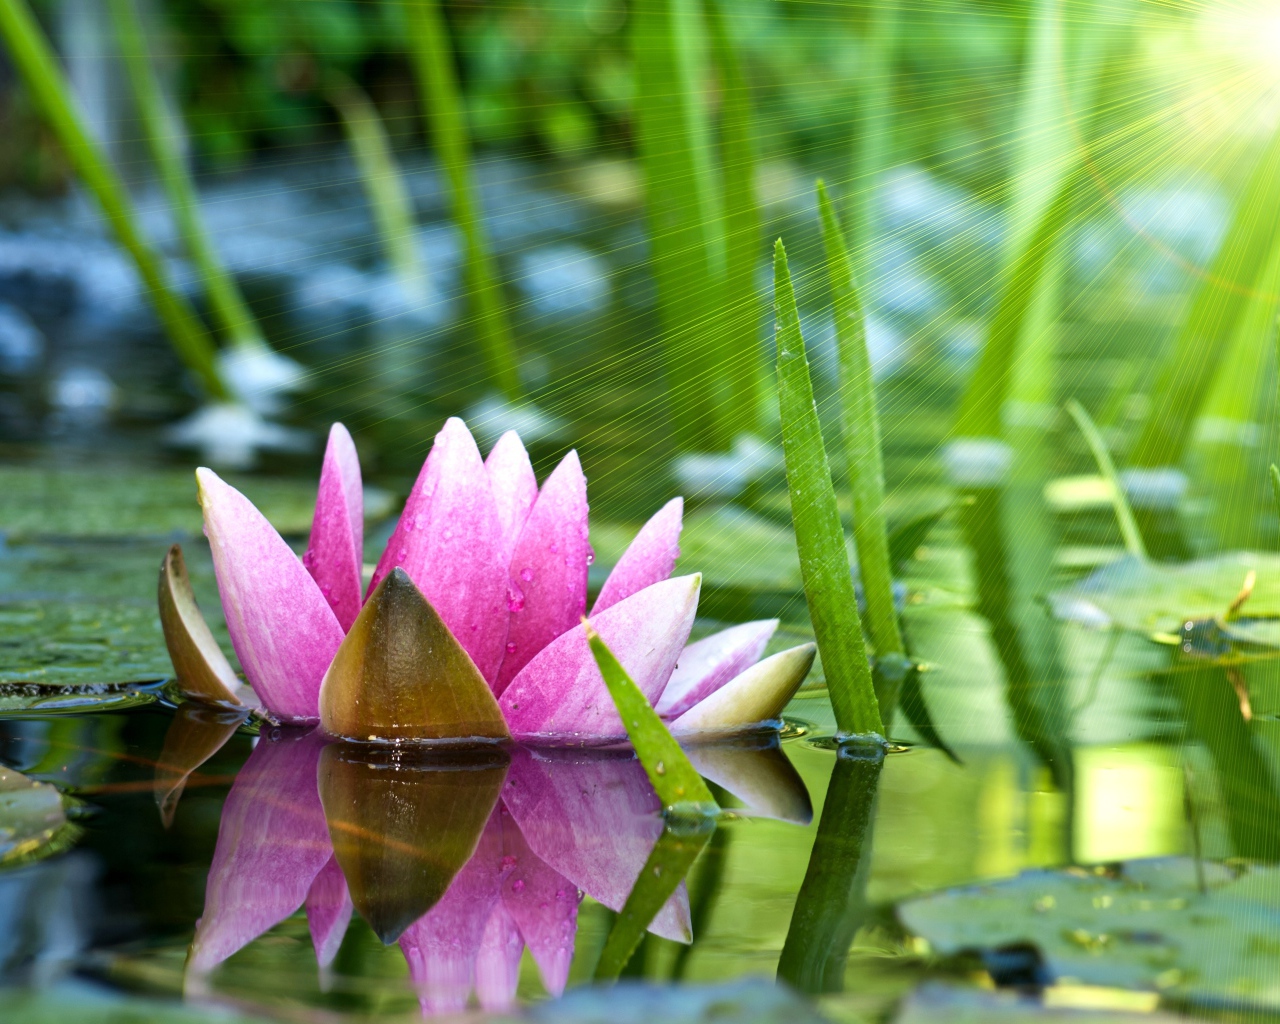 The reflection of the water Lily